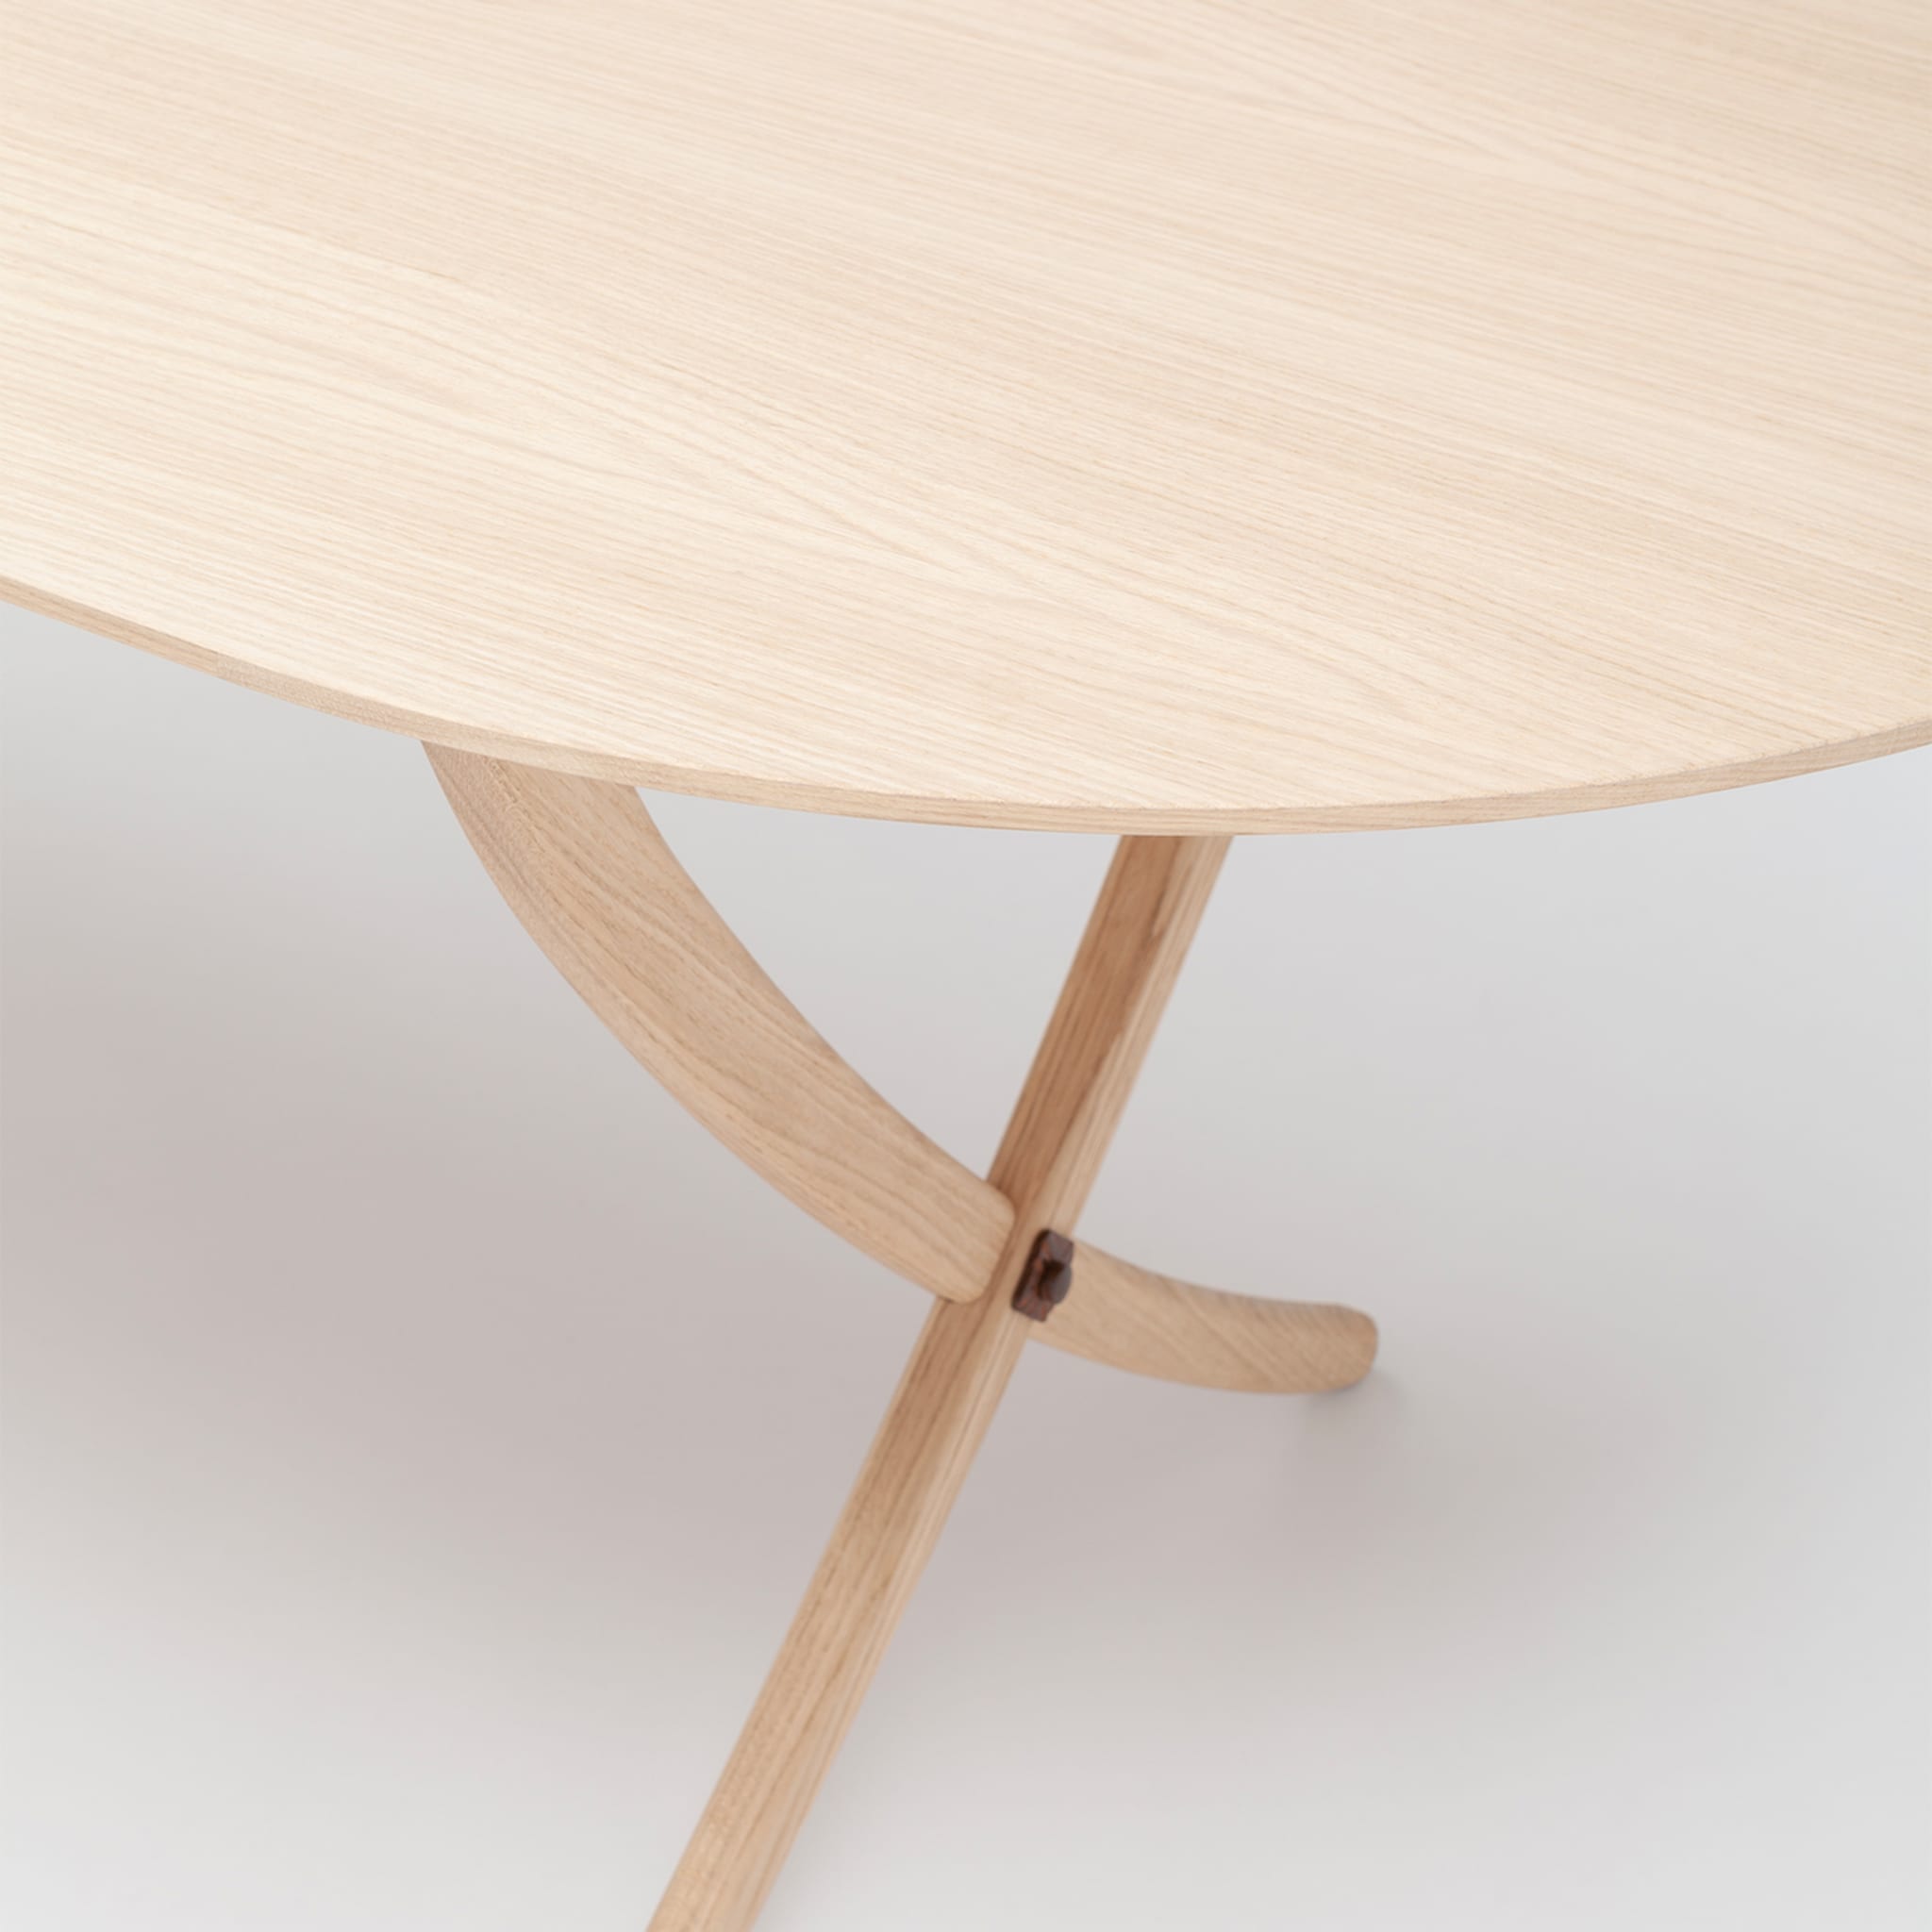 Arch Small Durmast Dining Table - Alternative view 1